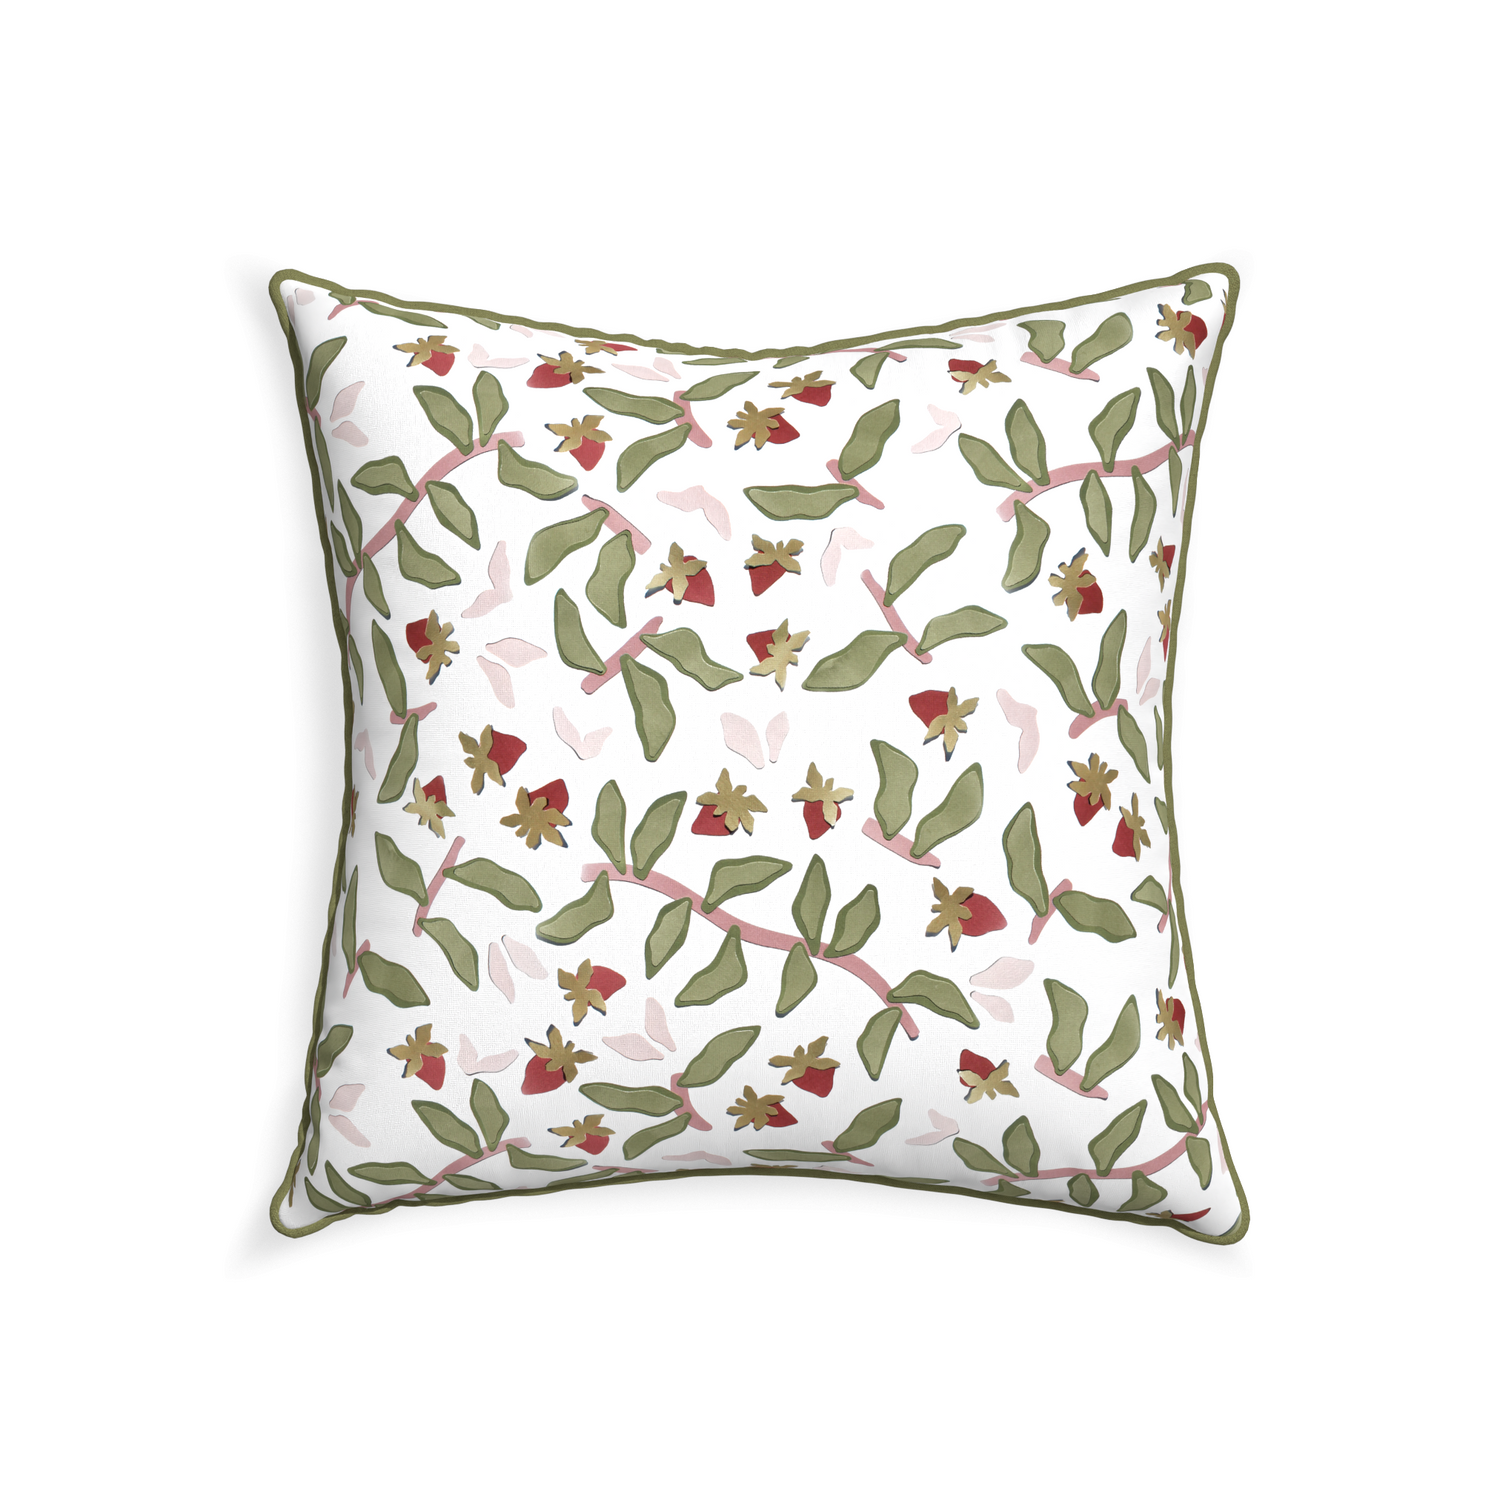 22-square nellie custom pillow with moss piping on white background